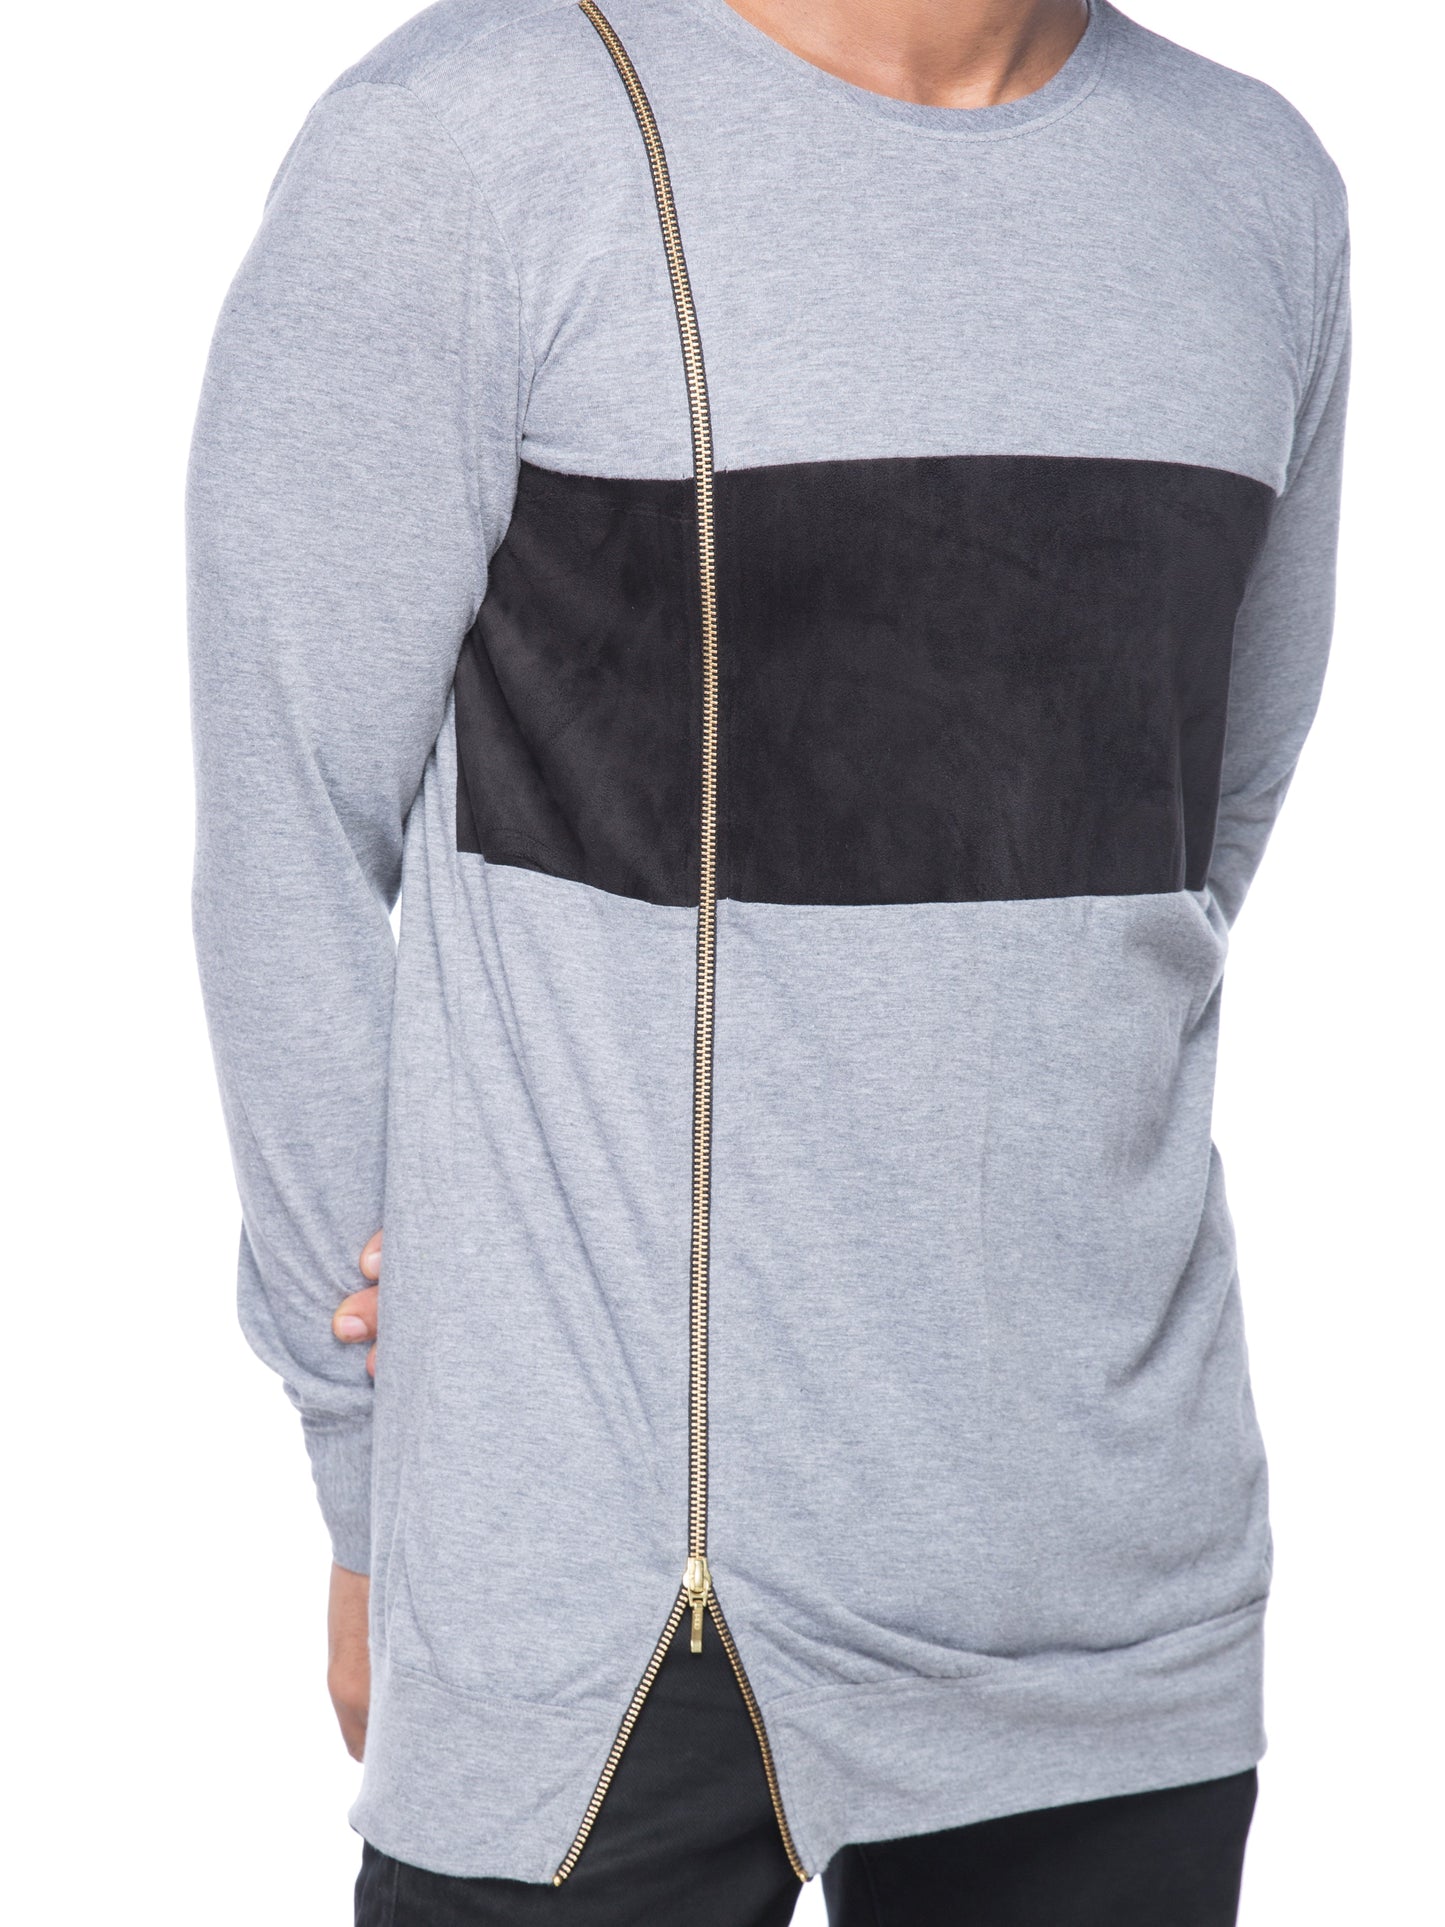 GREY AND BLACK SIDE ZIP T-SHIRT